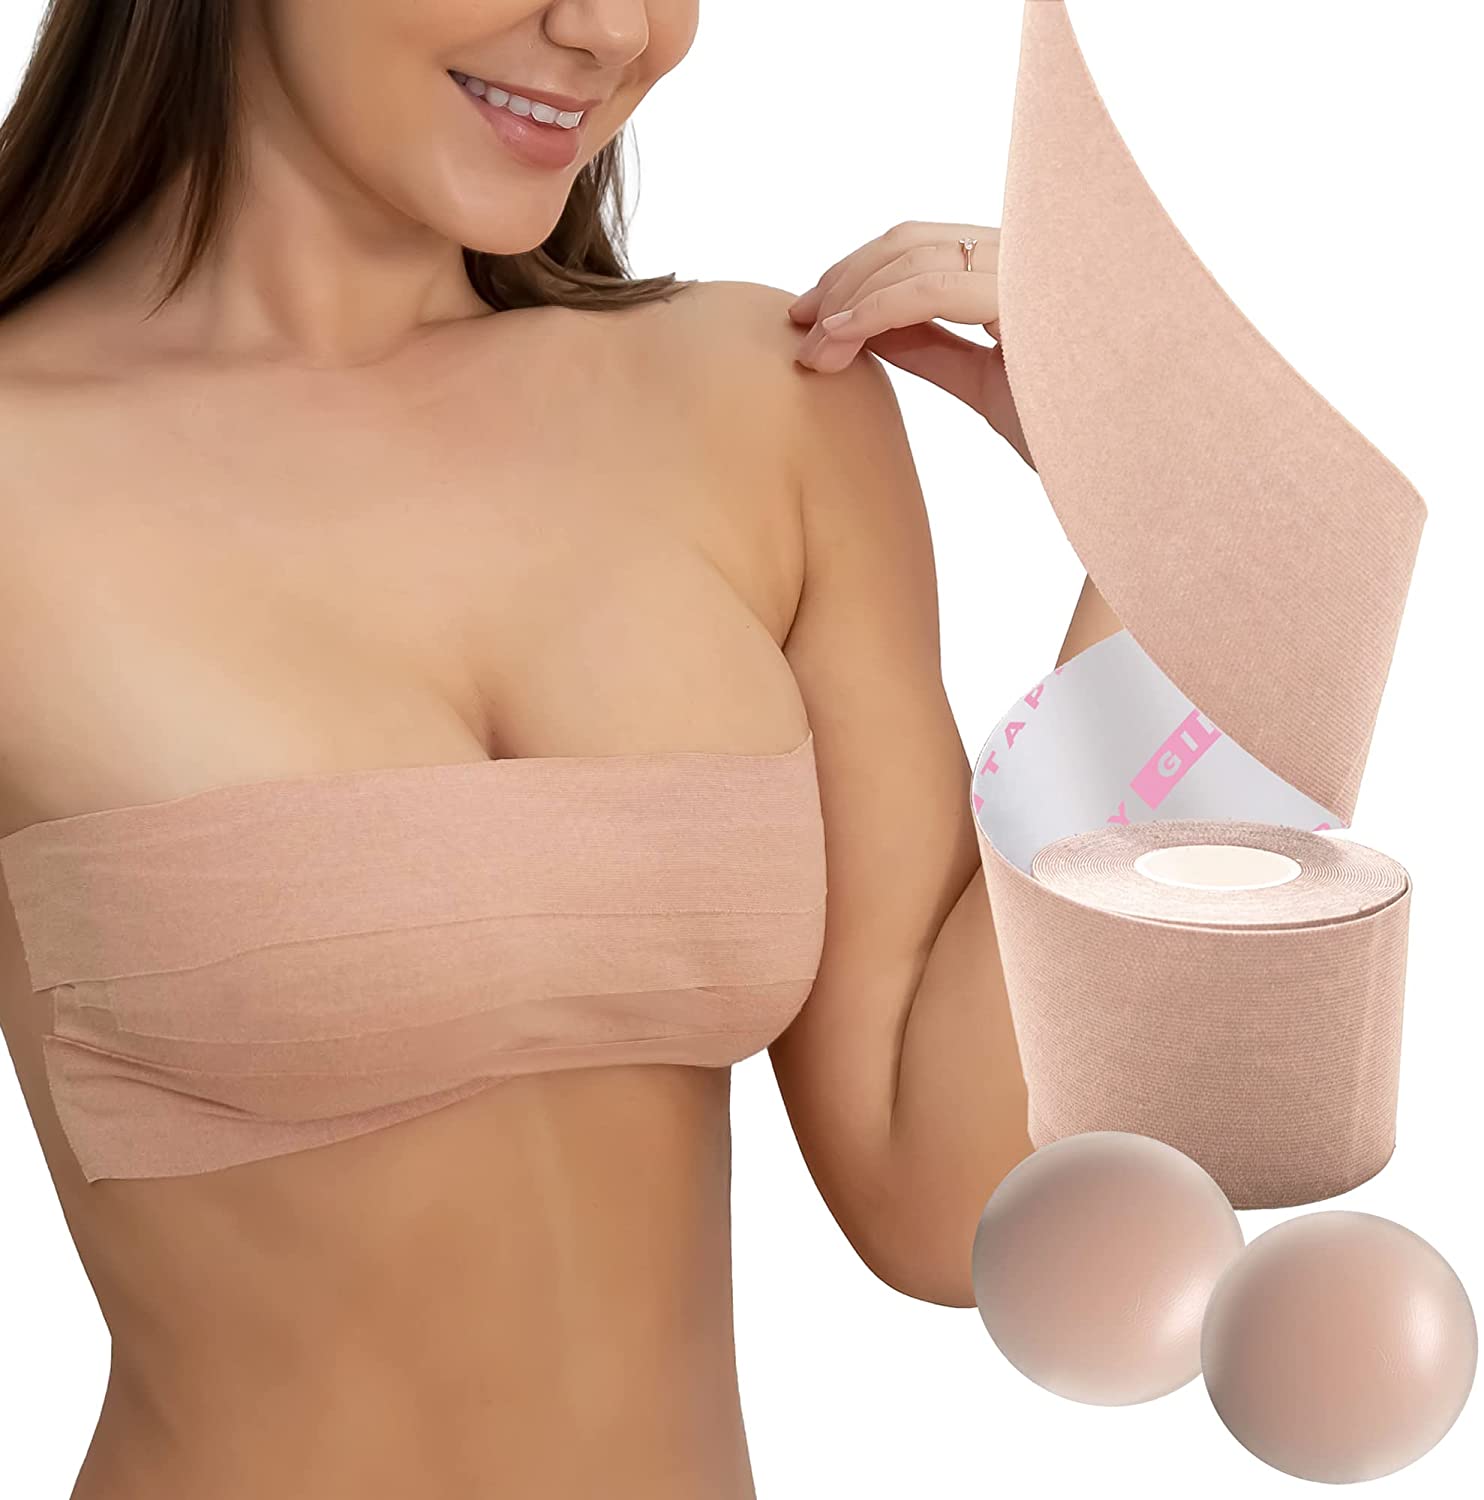 affluent PRIVE Boob Tape All Purpose Styling Tape 3.5 Meters Long